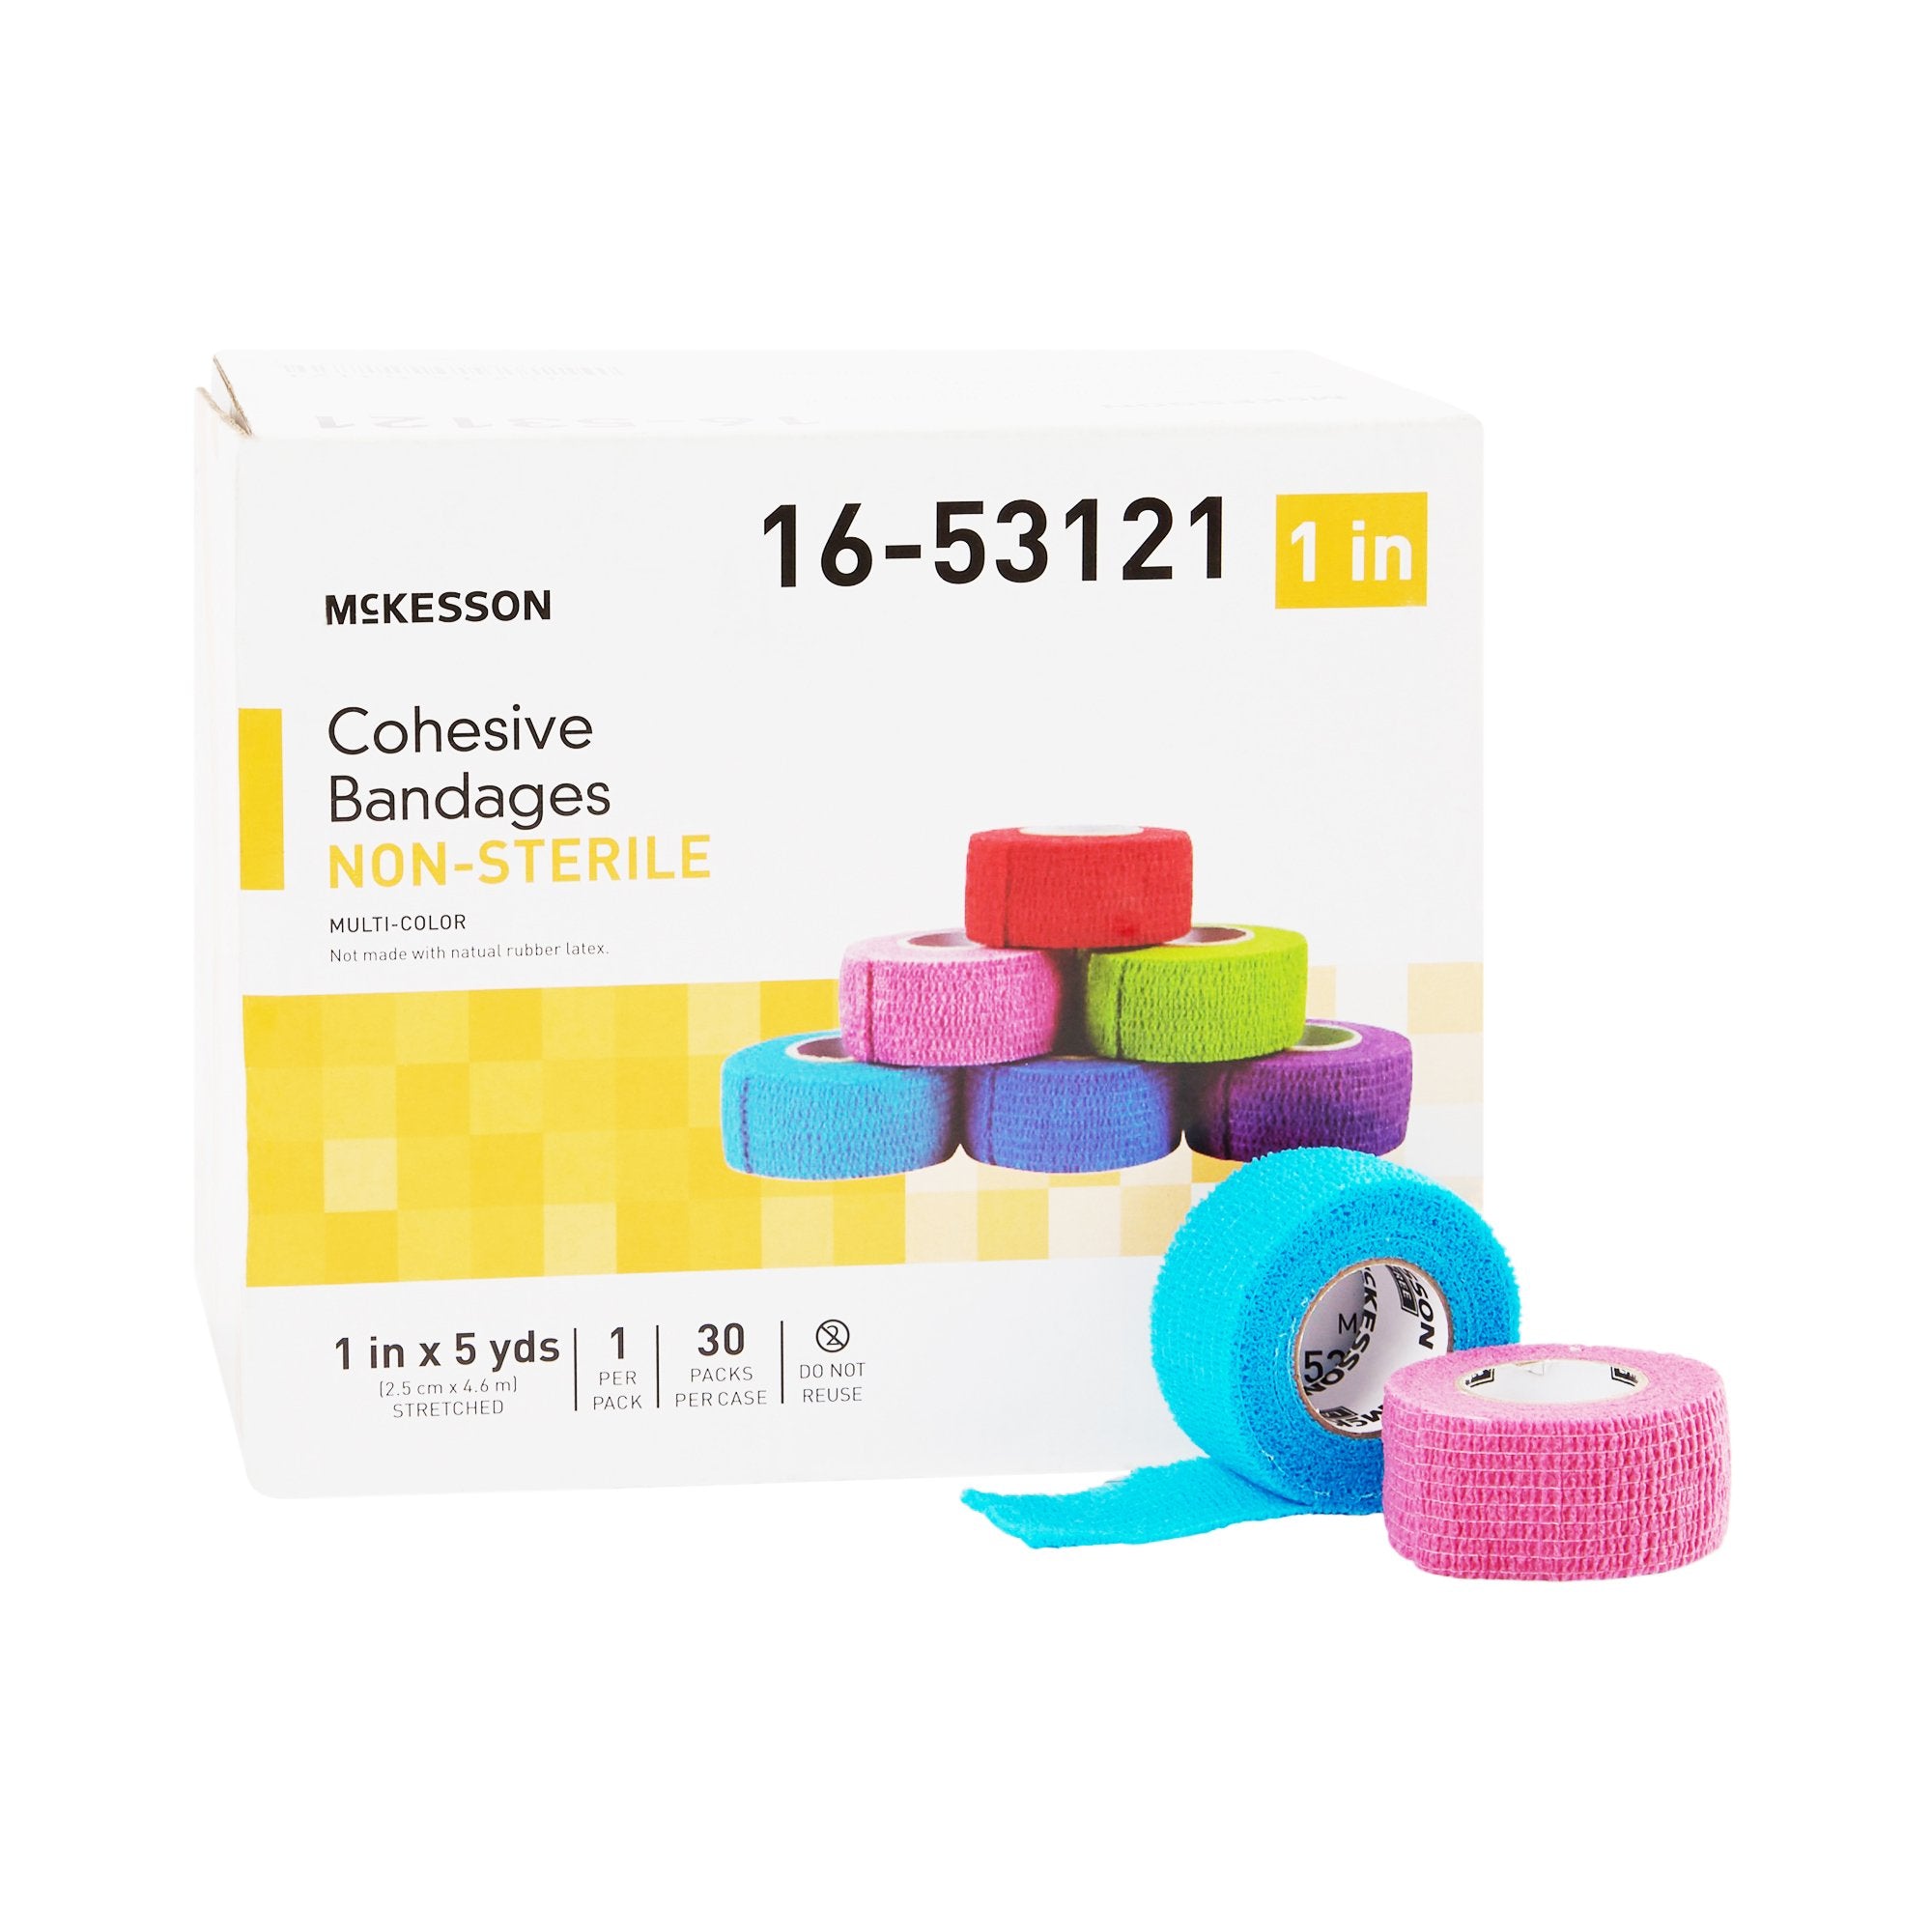 Cohesive Bandage McKesson 1 Inch X 5 Yard Self-Adherent Closure Purple / Pink / Green / Light Blue / Royal Blue / Red NonSterile Standard Compression